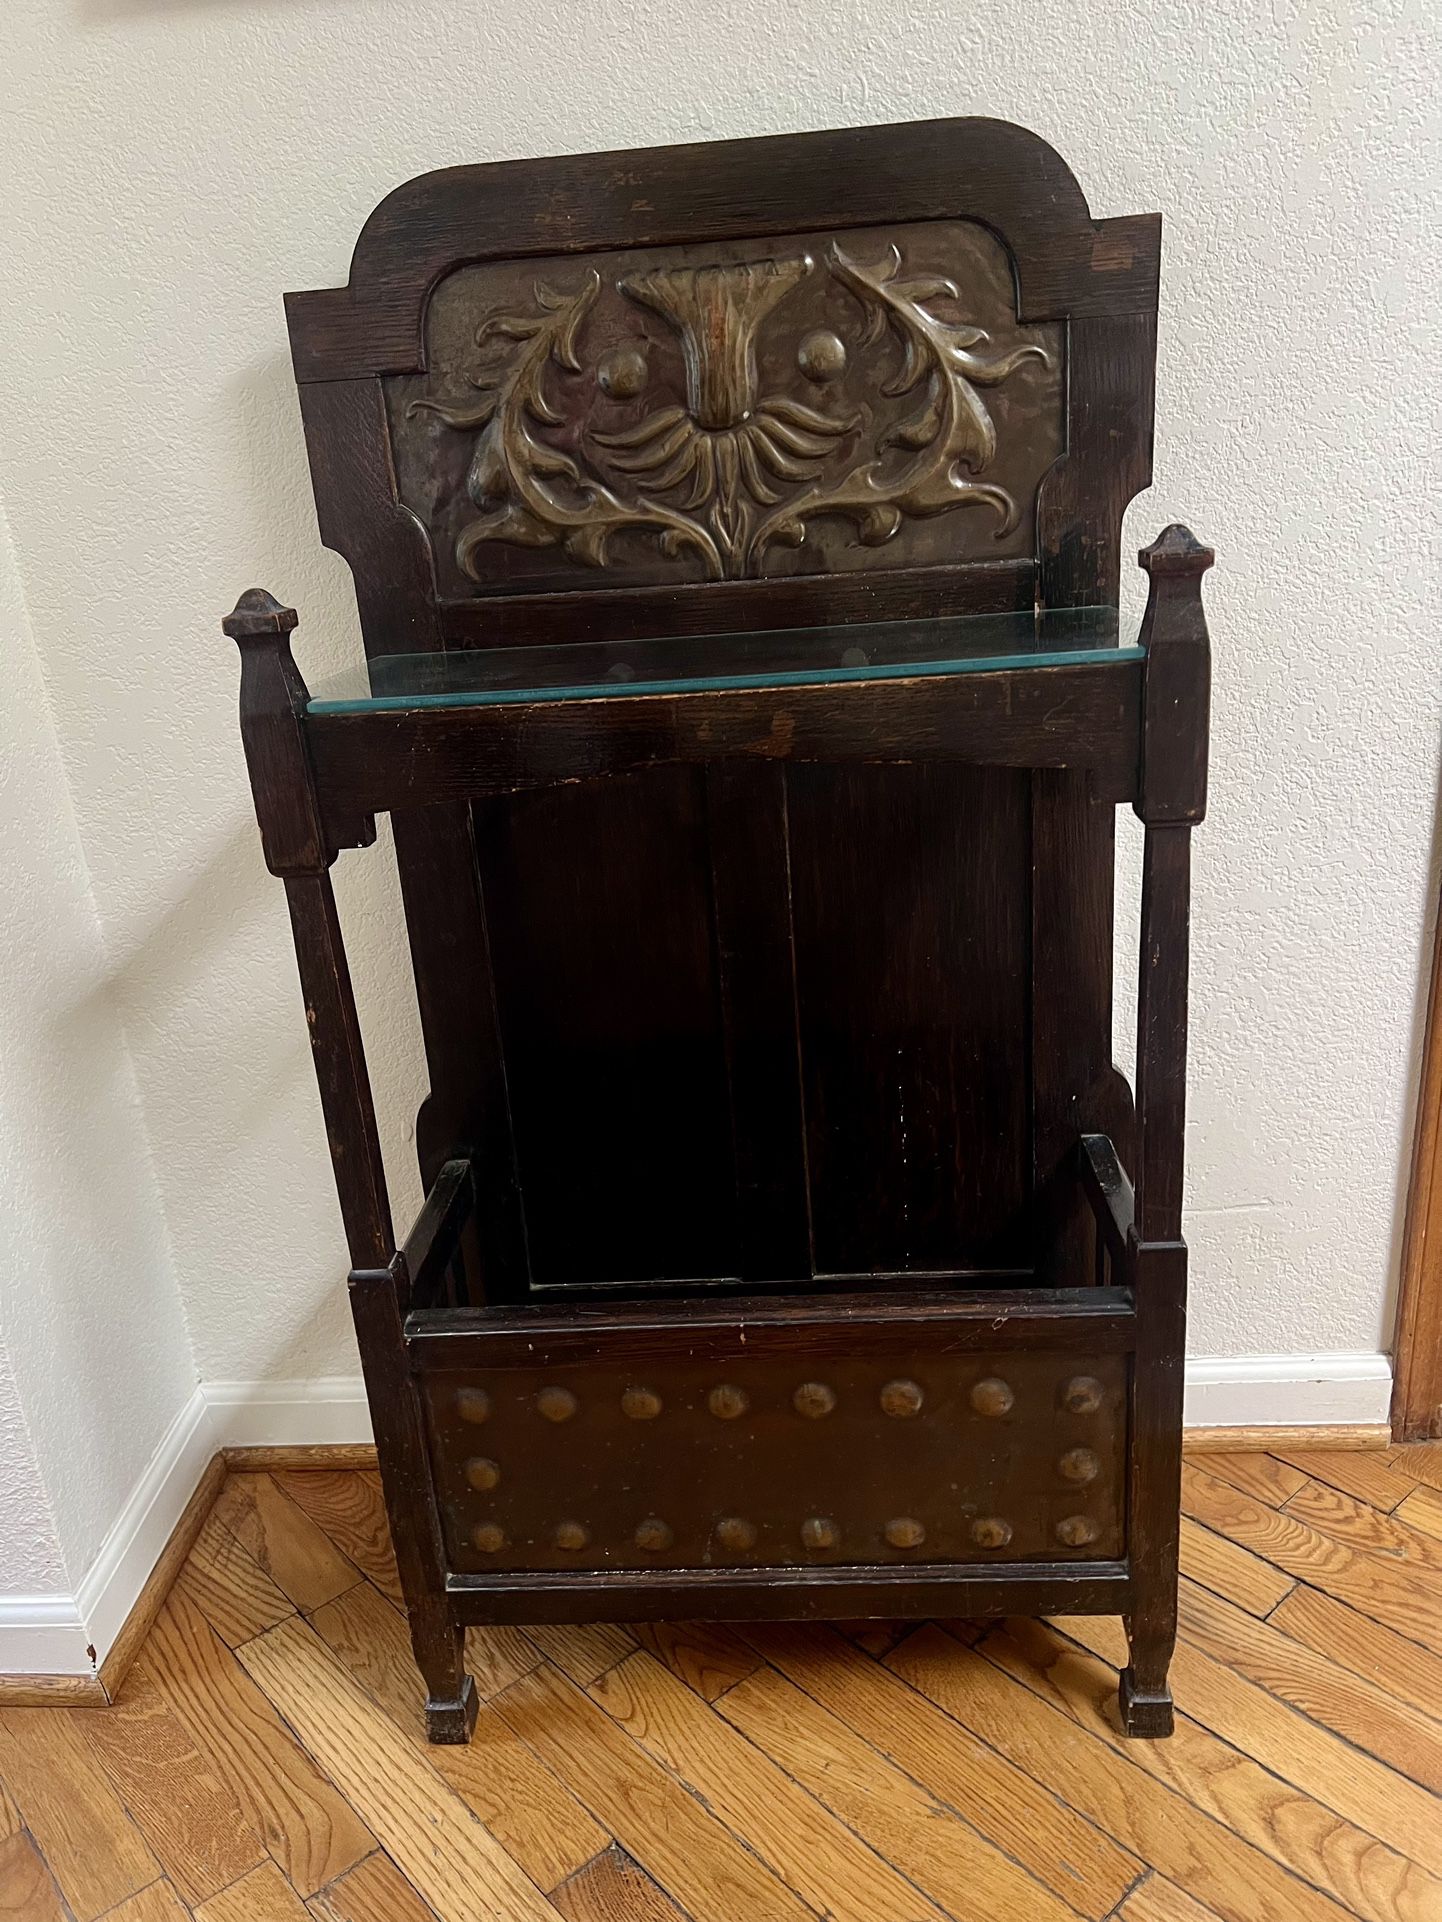 Antique wooden Umbrella stand With Lion’s Head